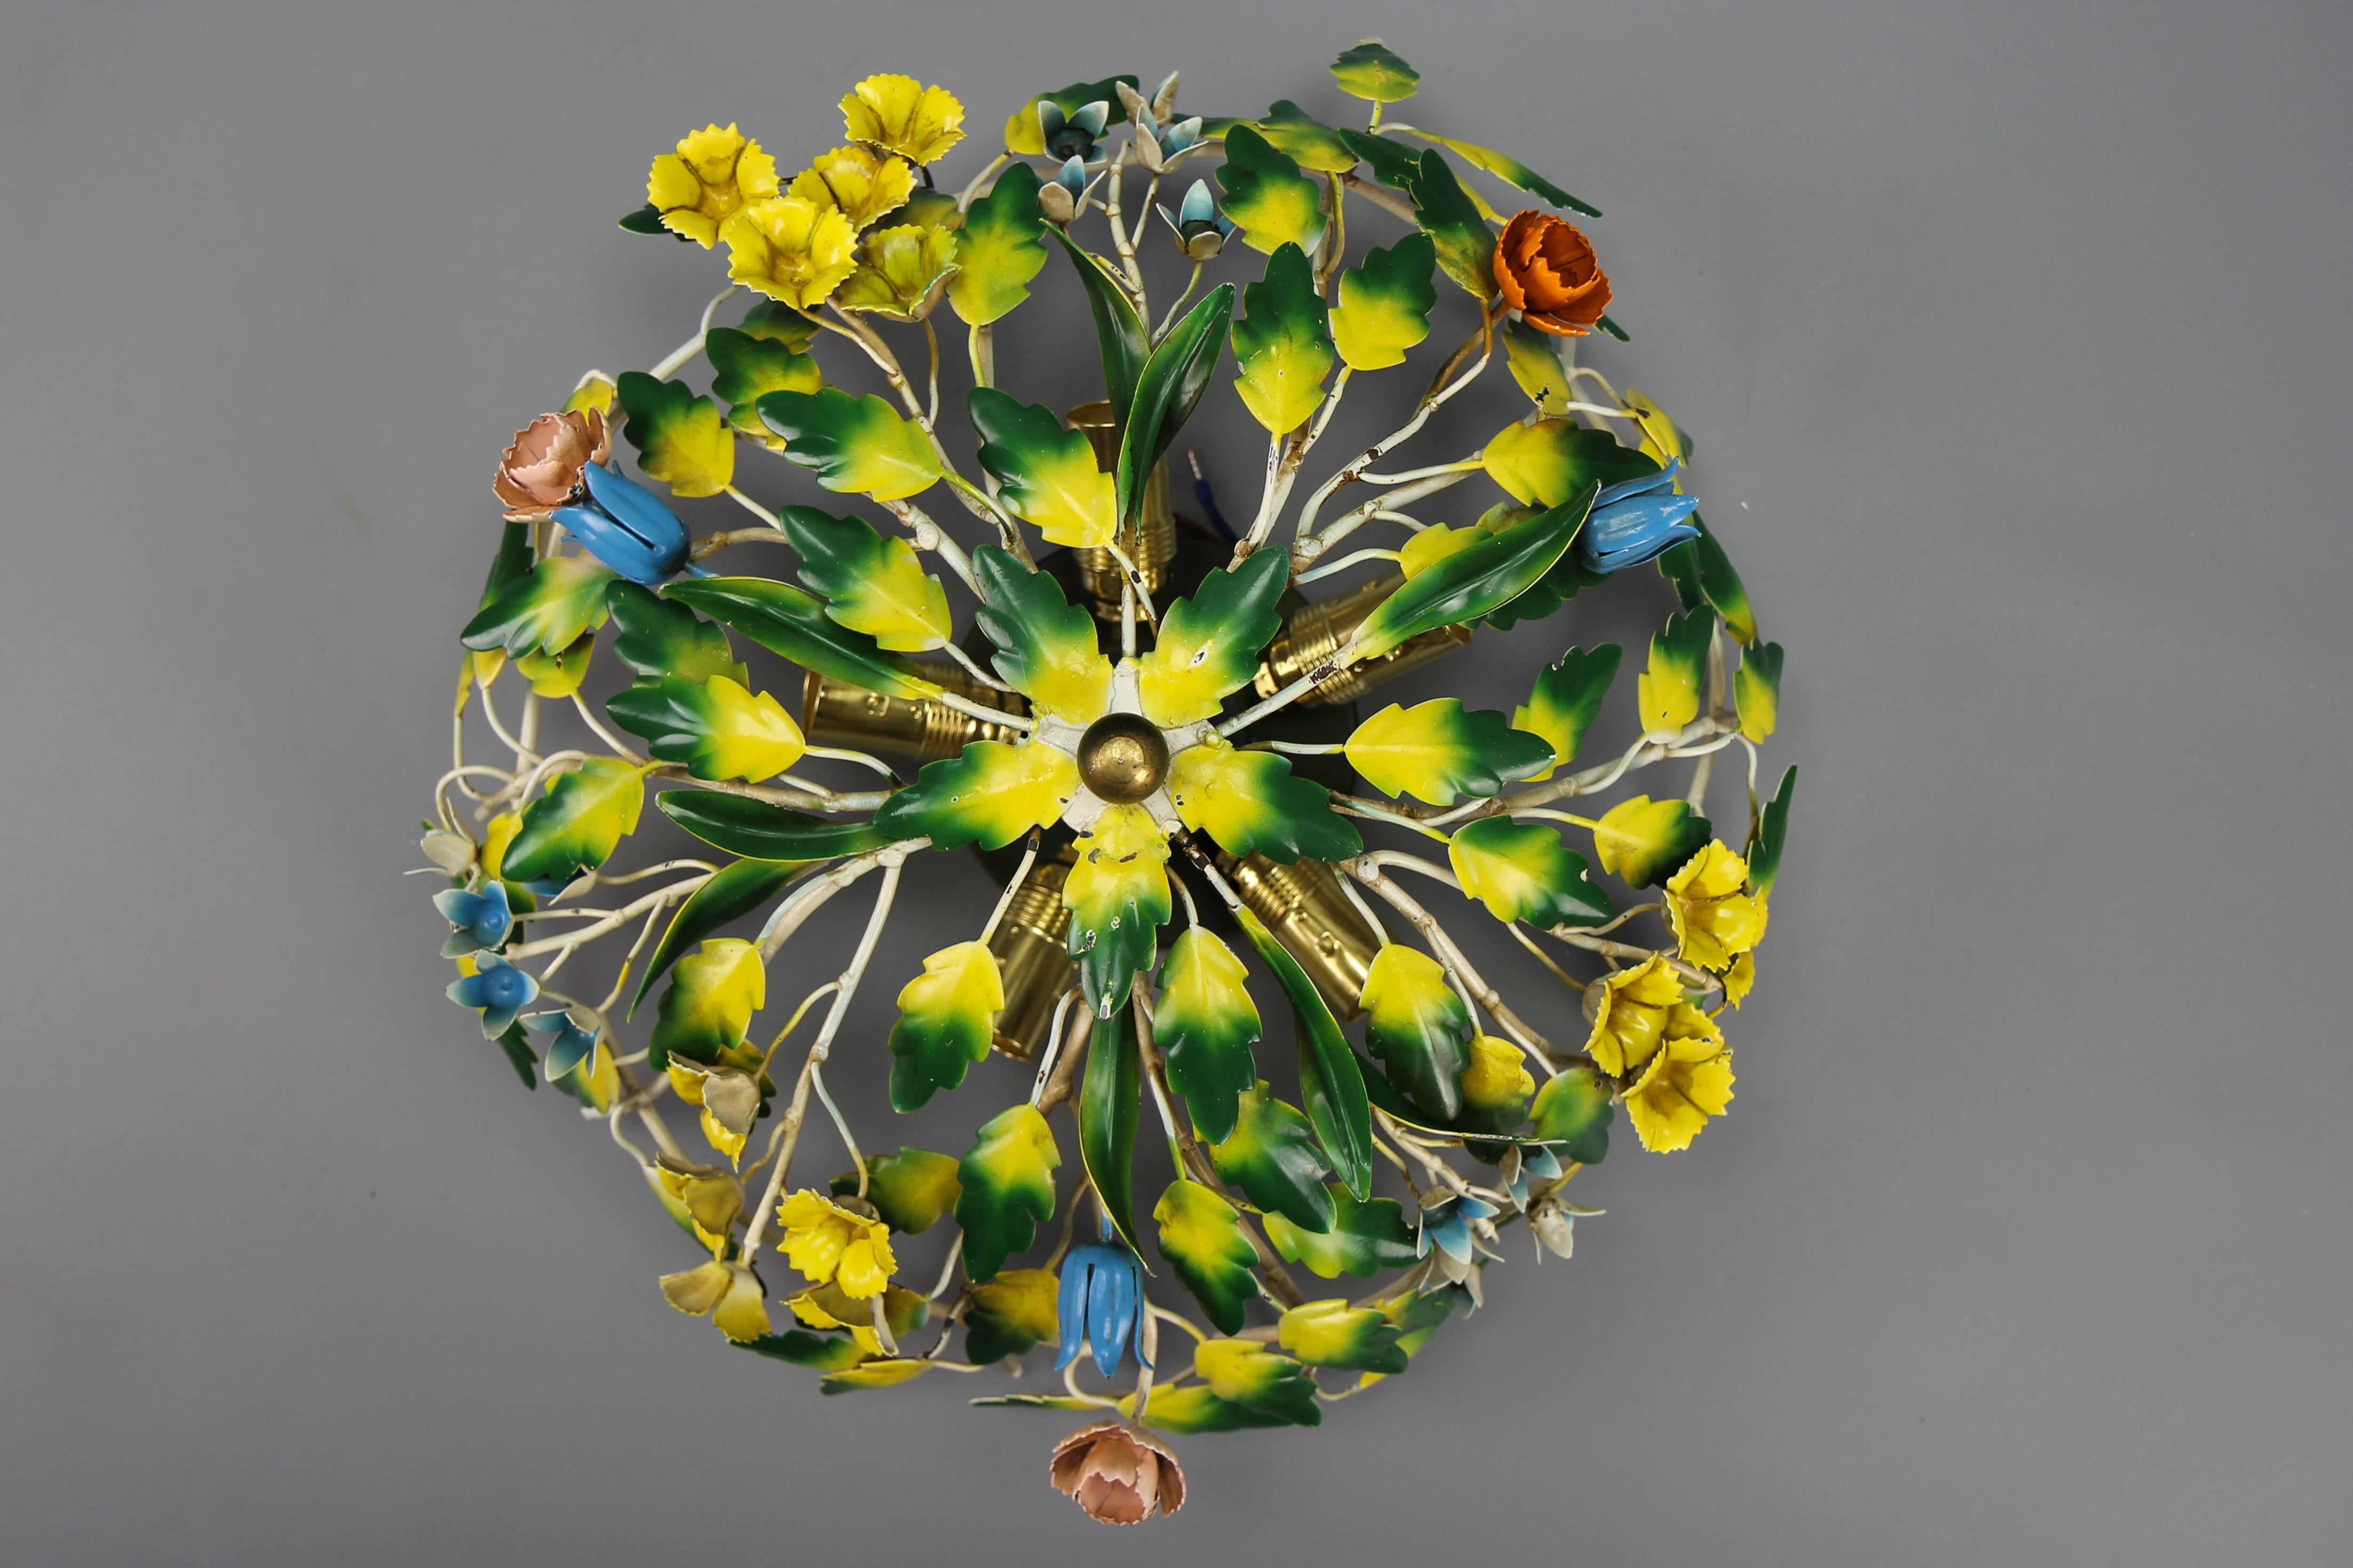 Polychrome painted metal flower five-light ceiling light, Italy, circa the 1970s.
A beautiful Italian ceiling light made of metal with flowers and leaves painted in pastel pink, blue, green, and yellow colors. Five sockets for E-14 size light